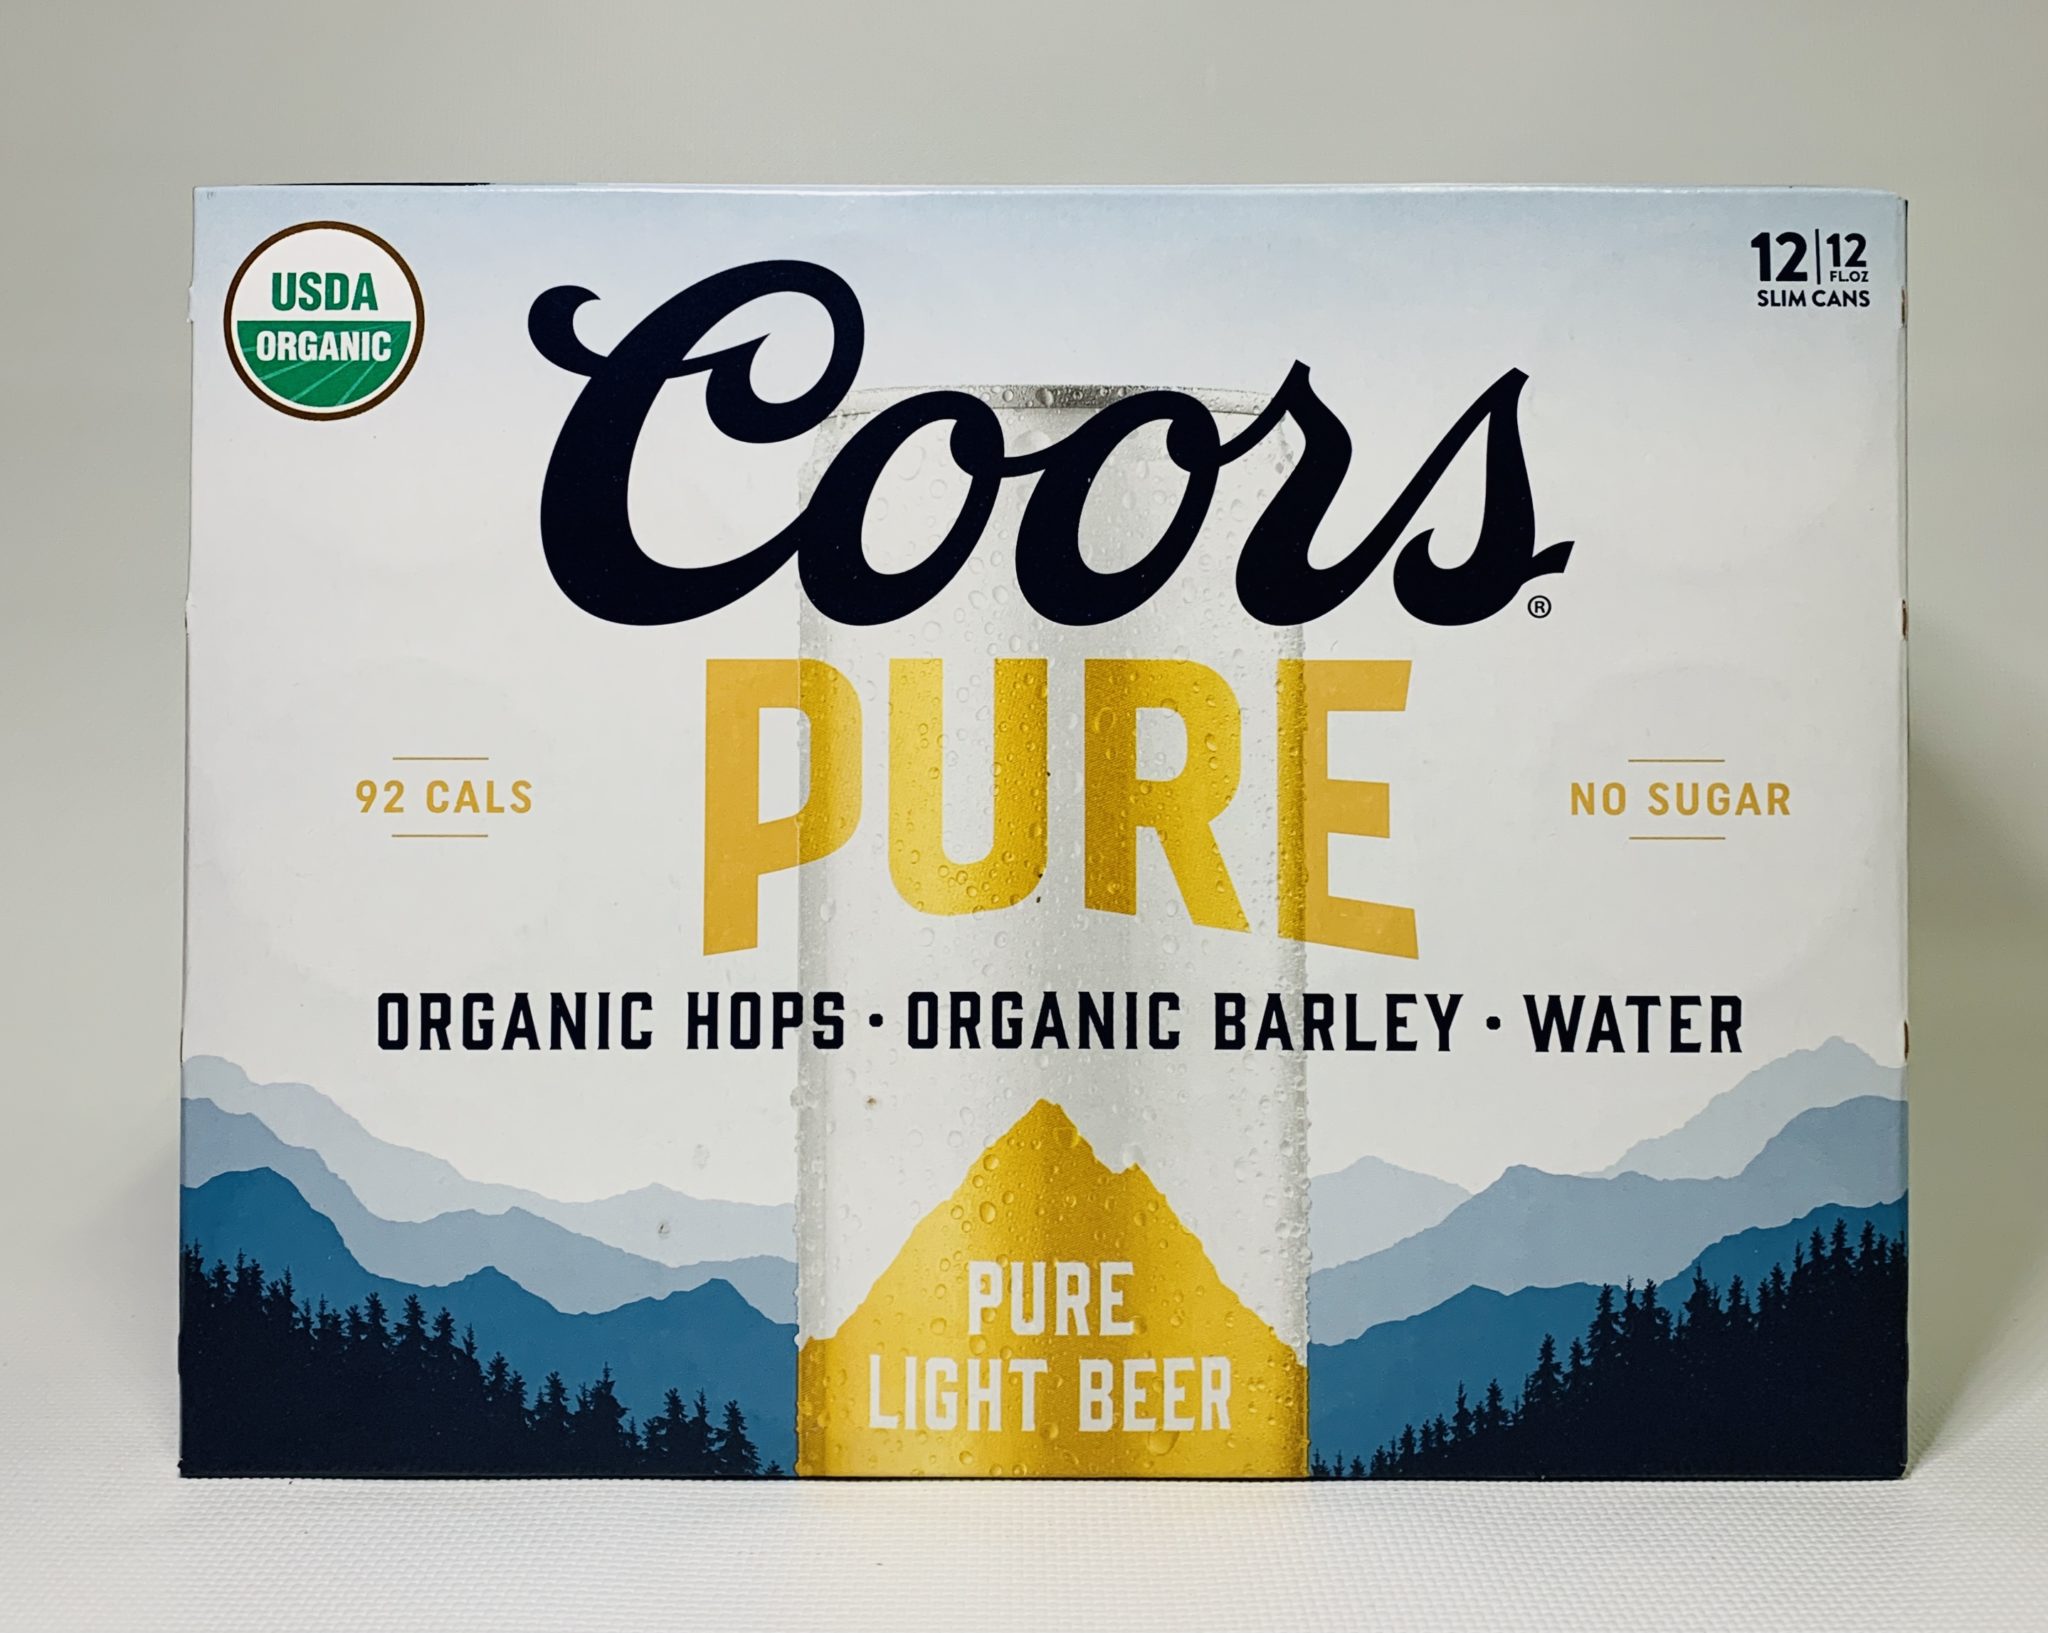 coors pure